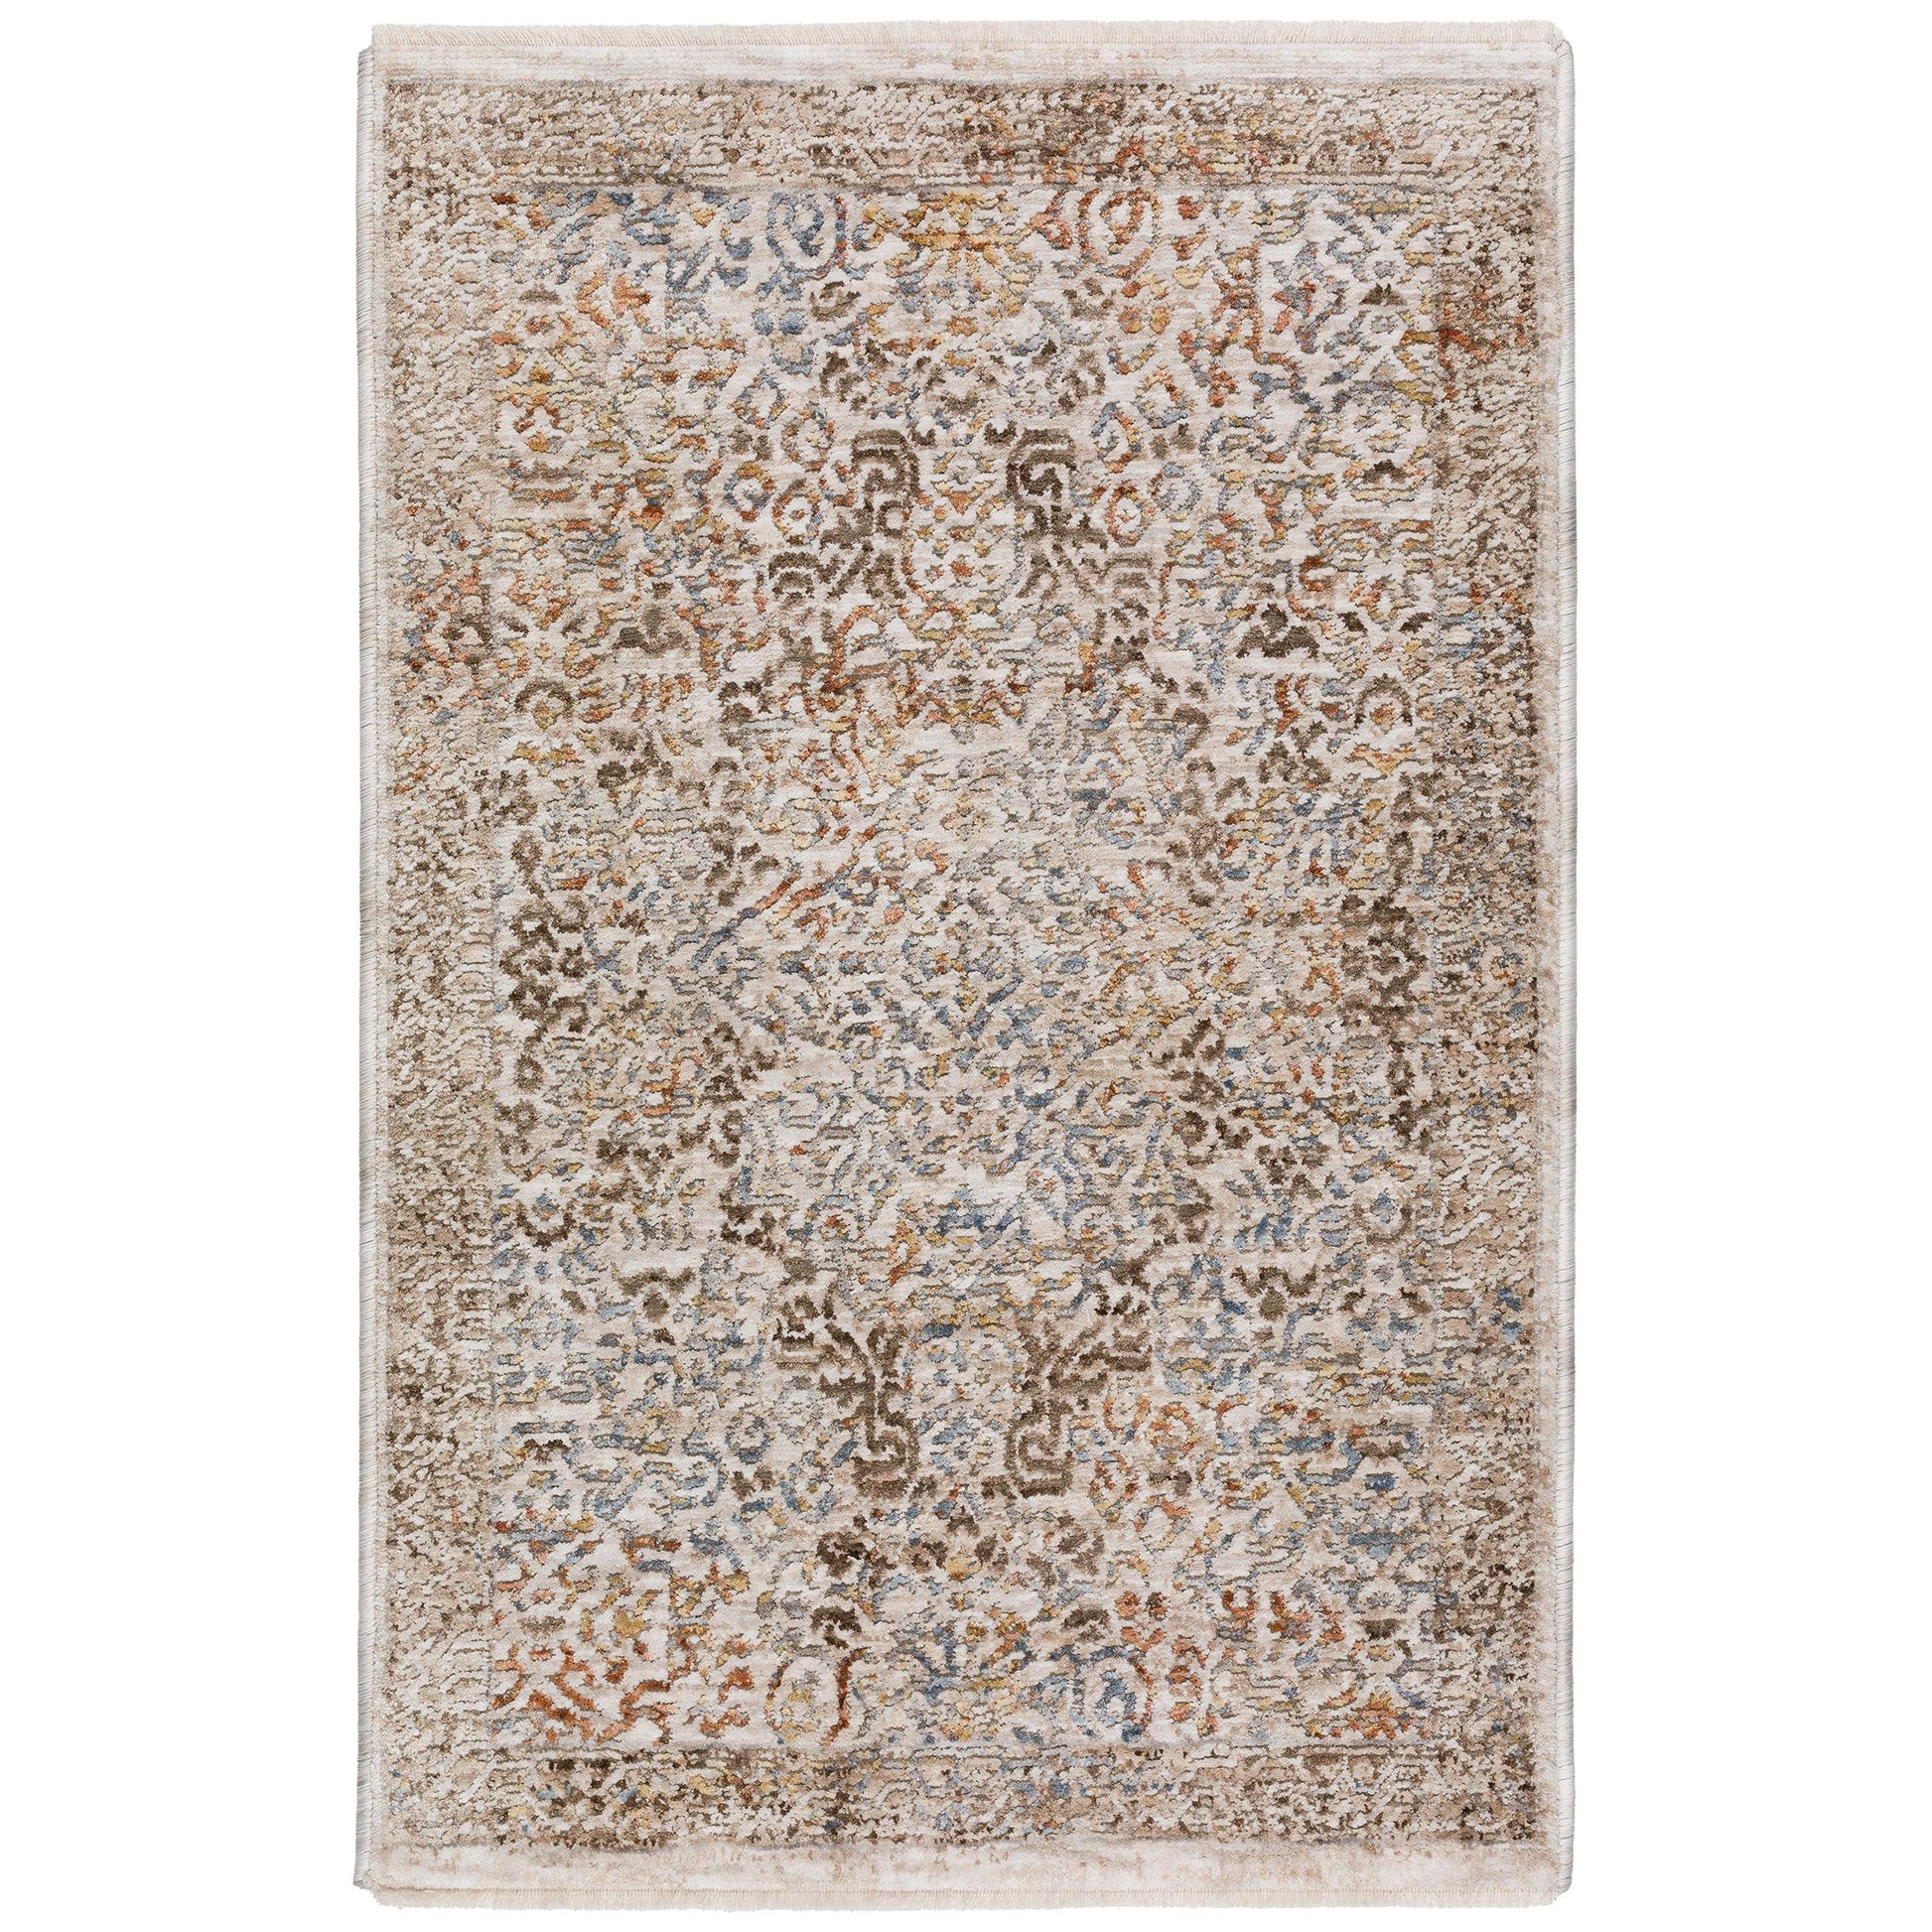 Dalyn Rugs Vienna VI5 Ivory Traditional Power Woven Rug